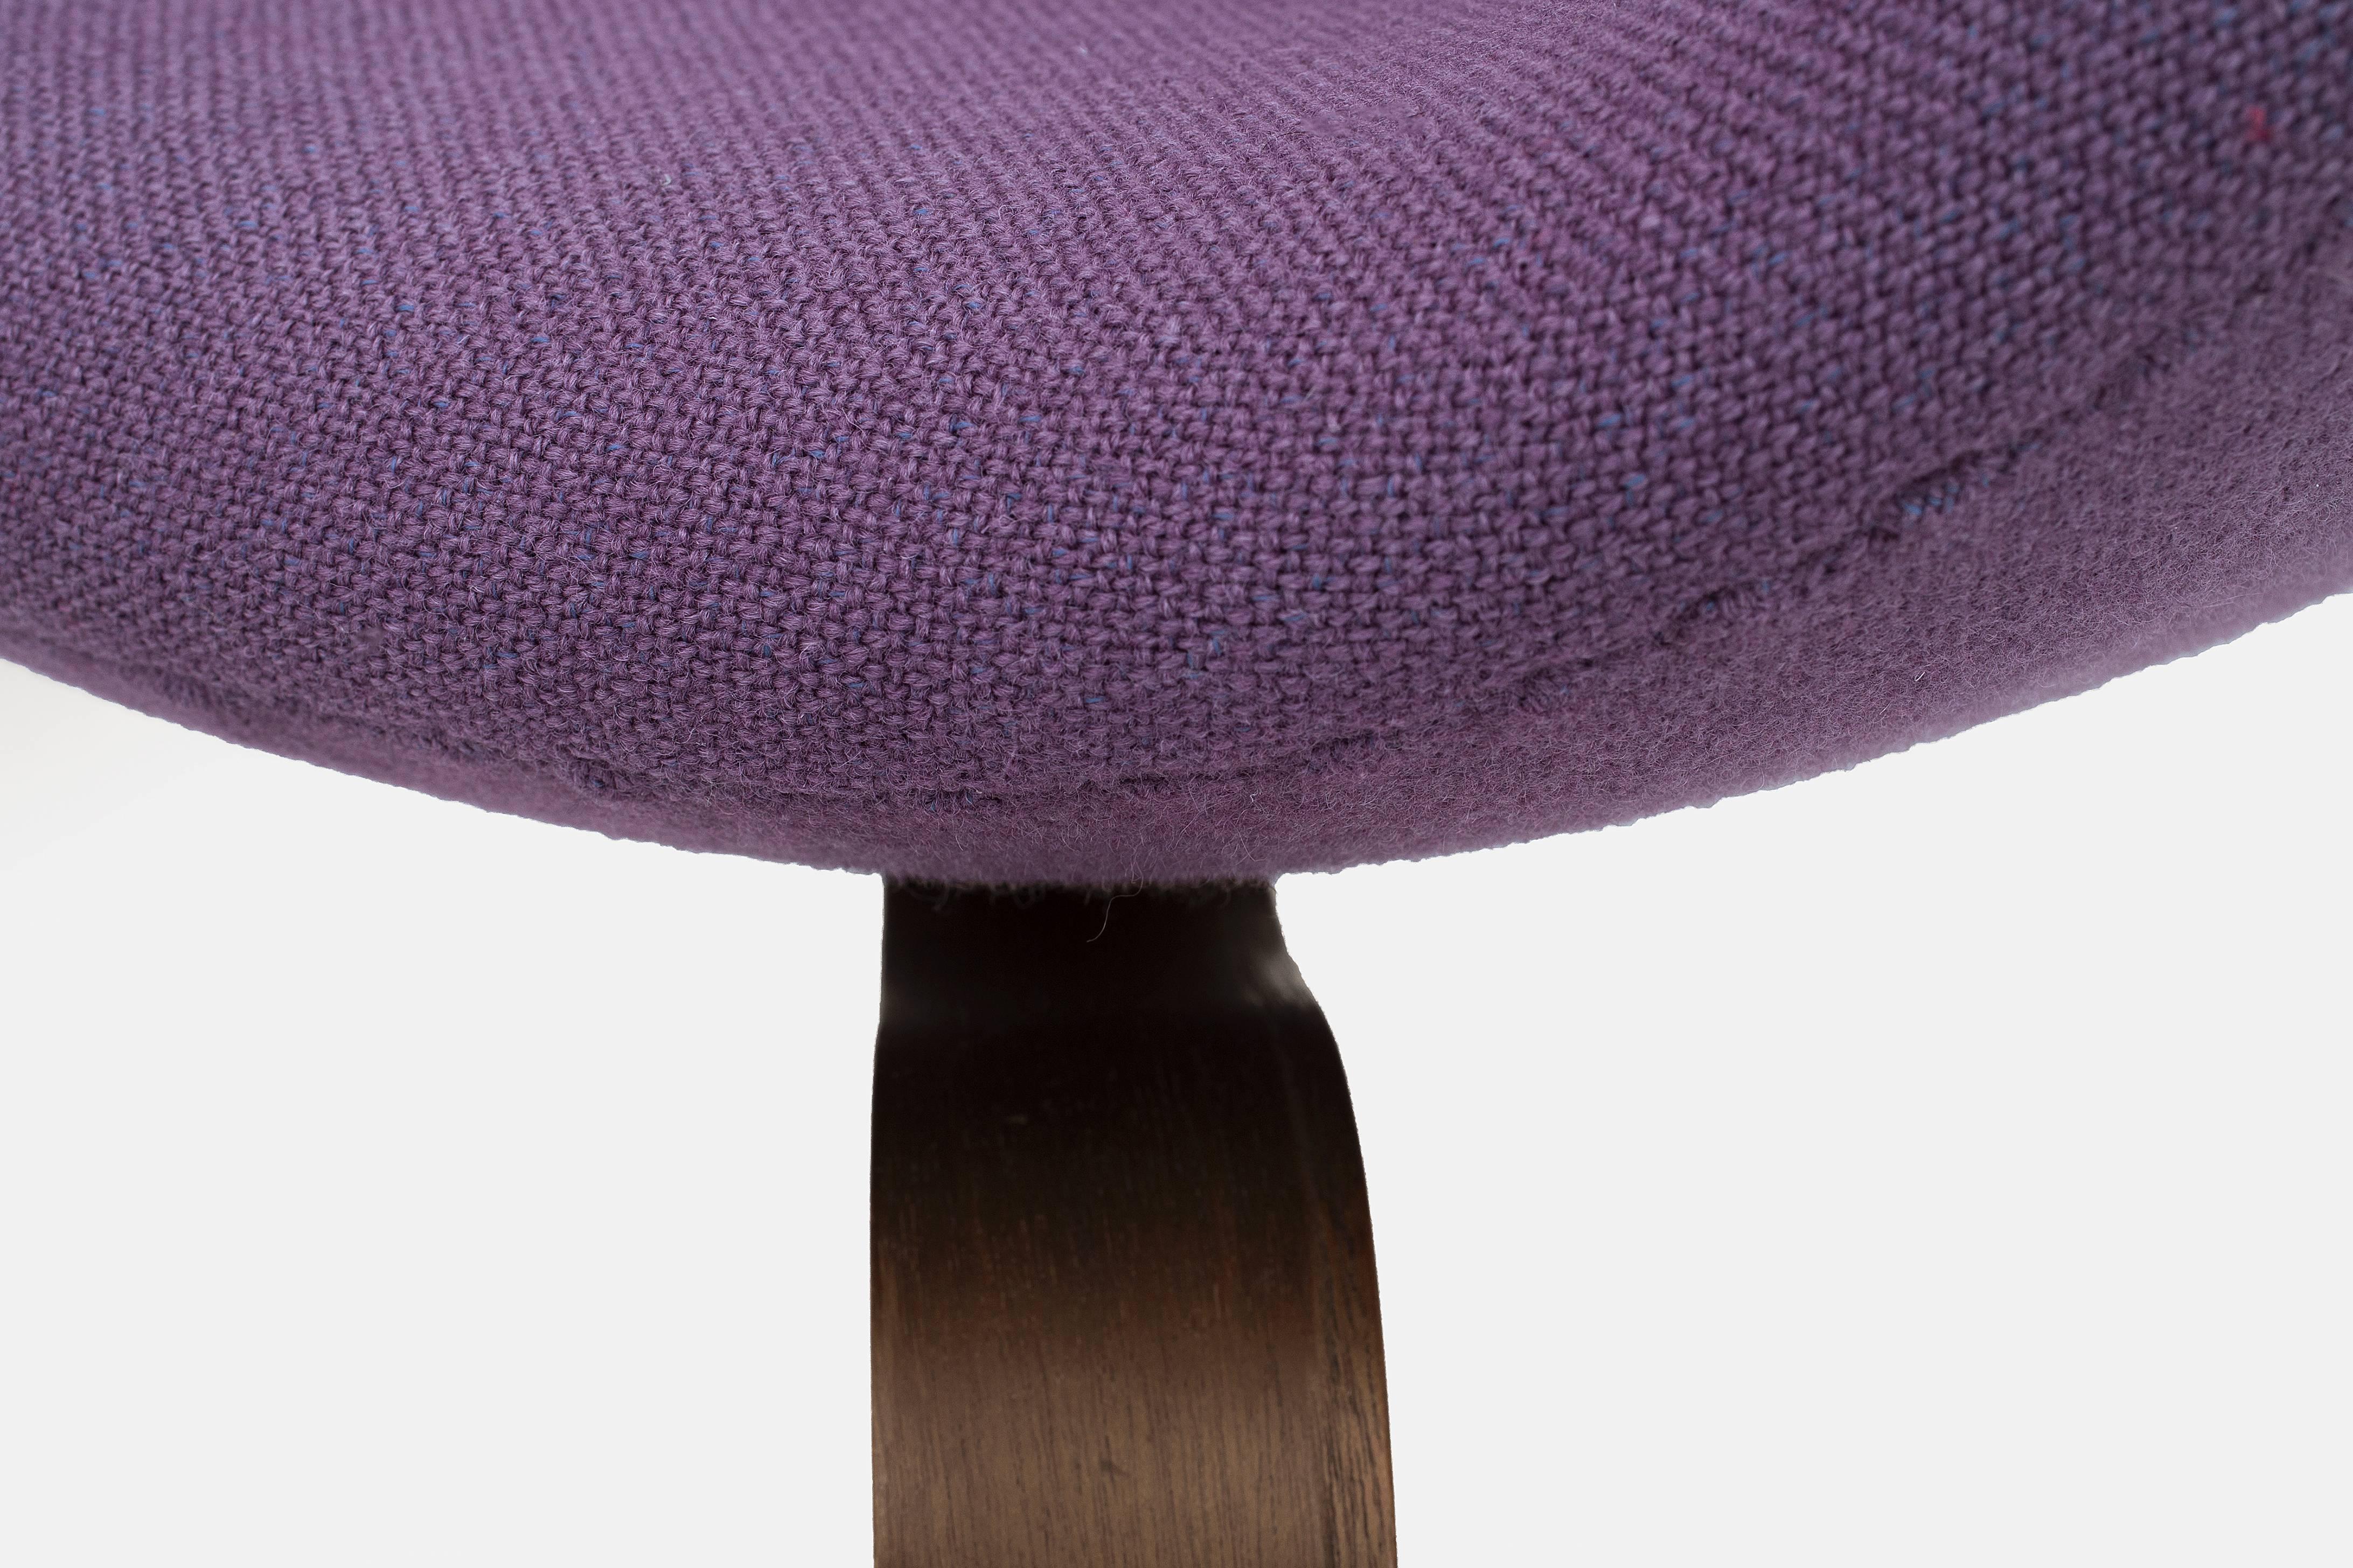 Swan chair with wooden teak legs. Model 4325. Upholstered with original purple fabric. This chair has been produced in a limited amount between 1960-1967 by Fritz Hansen, Denmark.